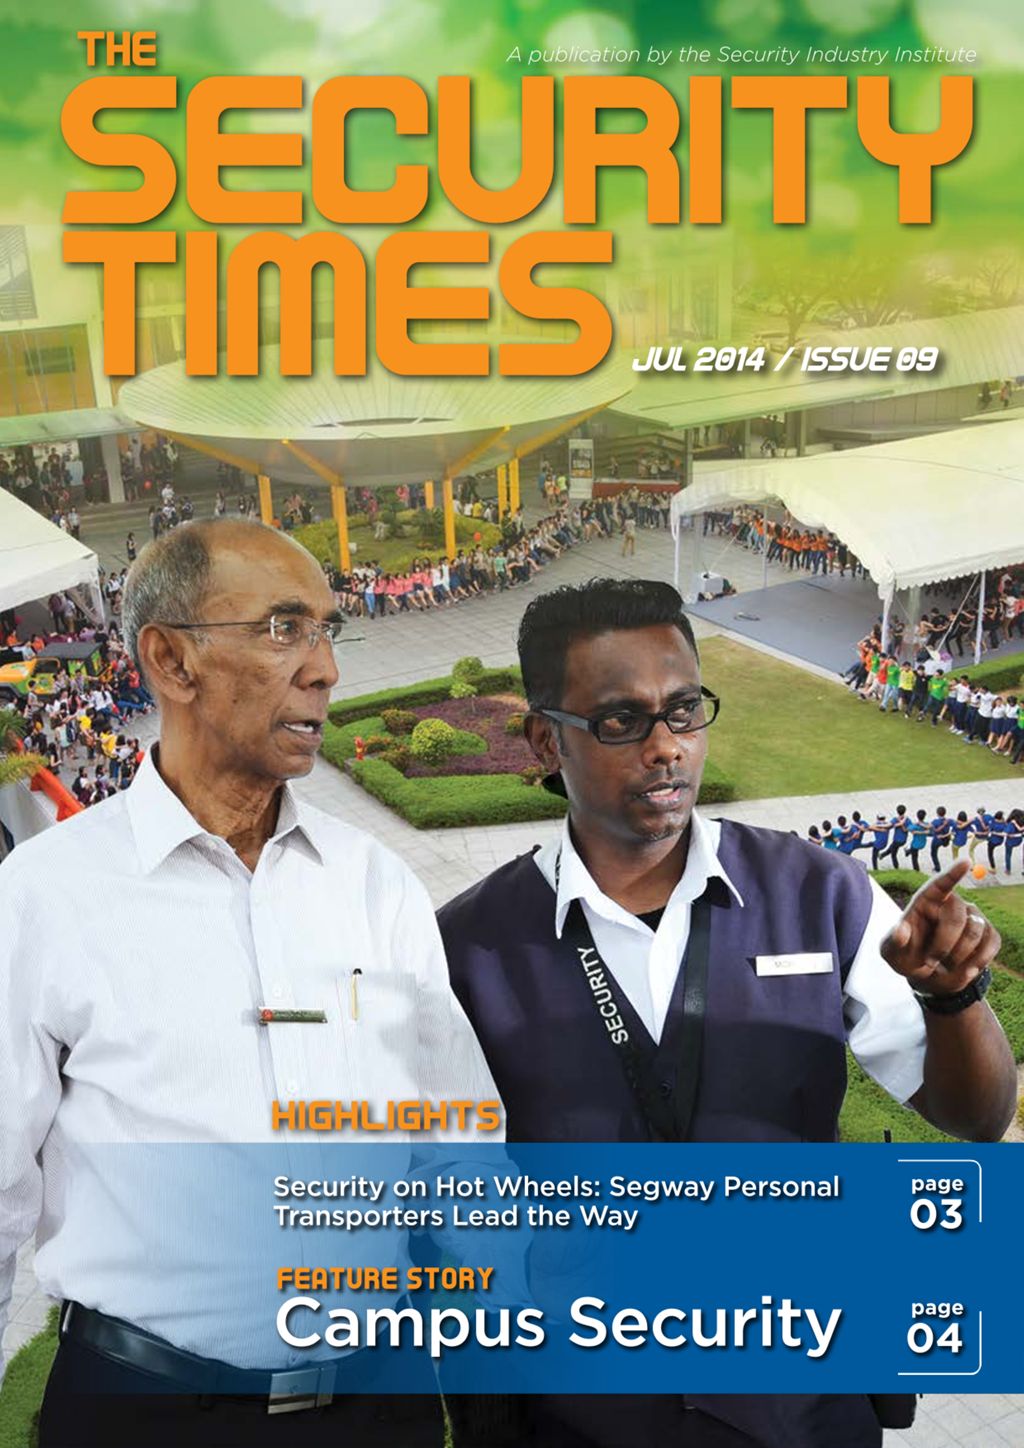 The Security Times : a publication by the Security Industry Institute. Jul. 2014. Issue 09